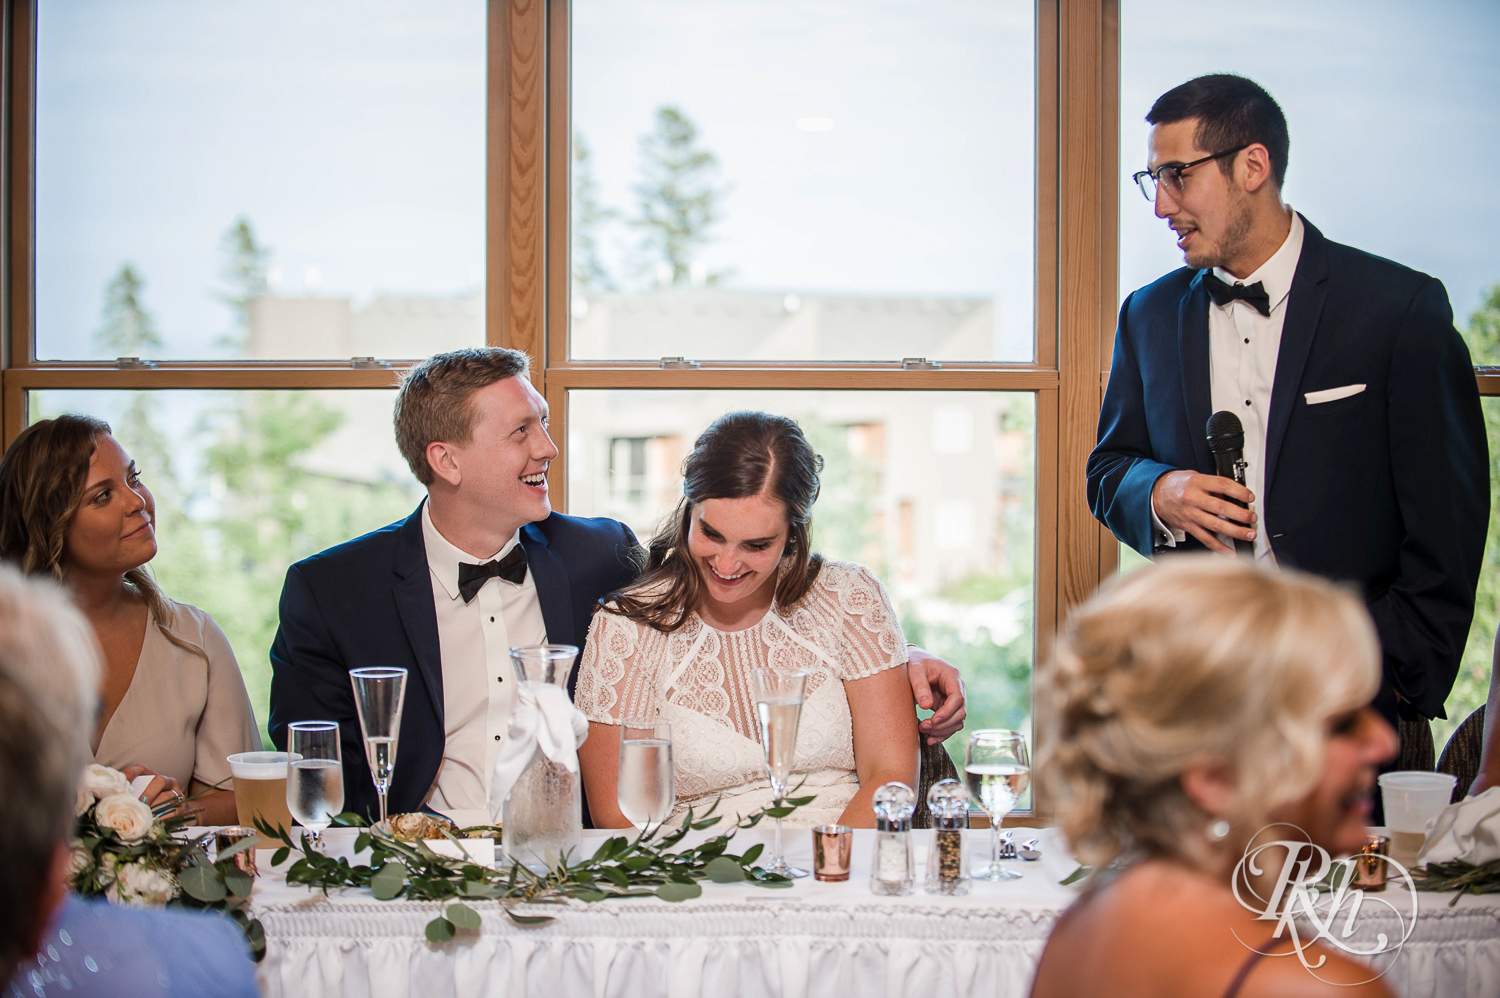 Bride and groom smile during wedding reception during their Bluefin Bay wedding in Tofte, Minnesota.